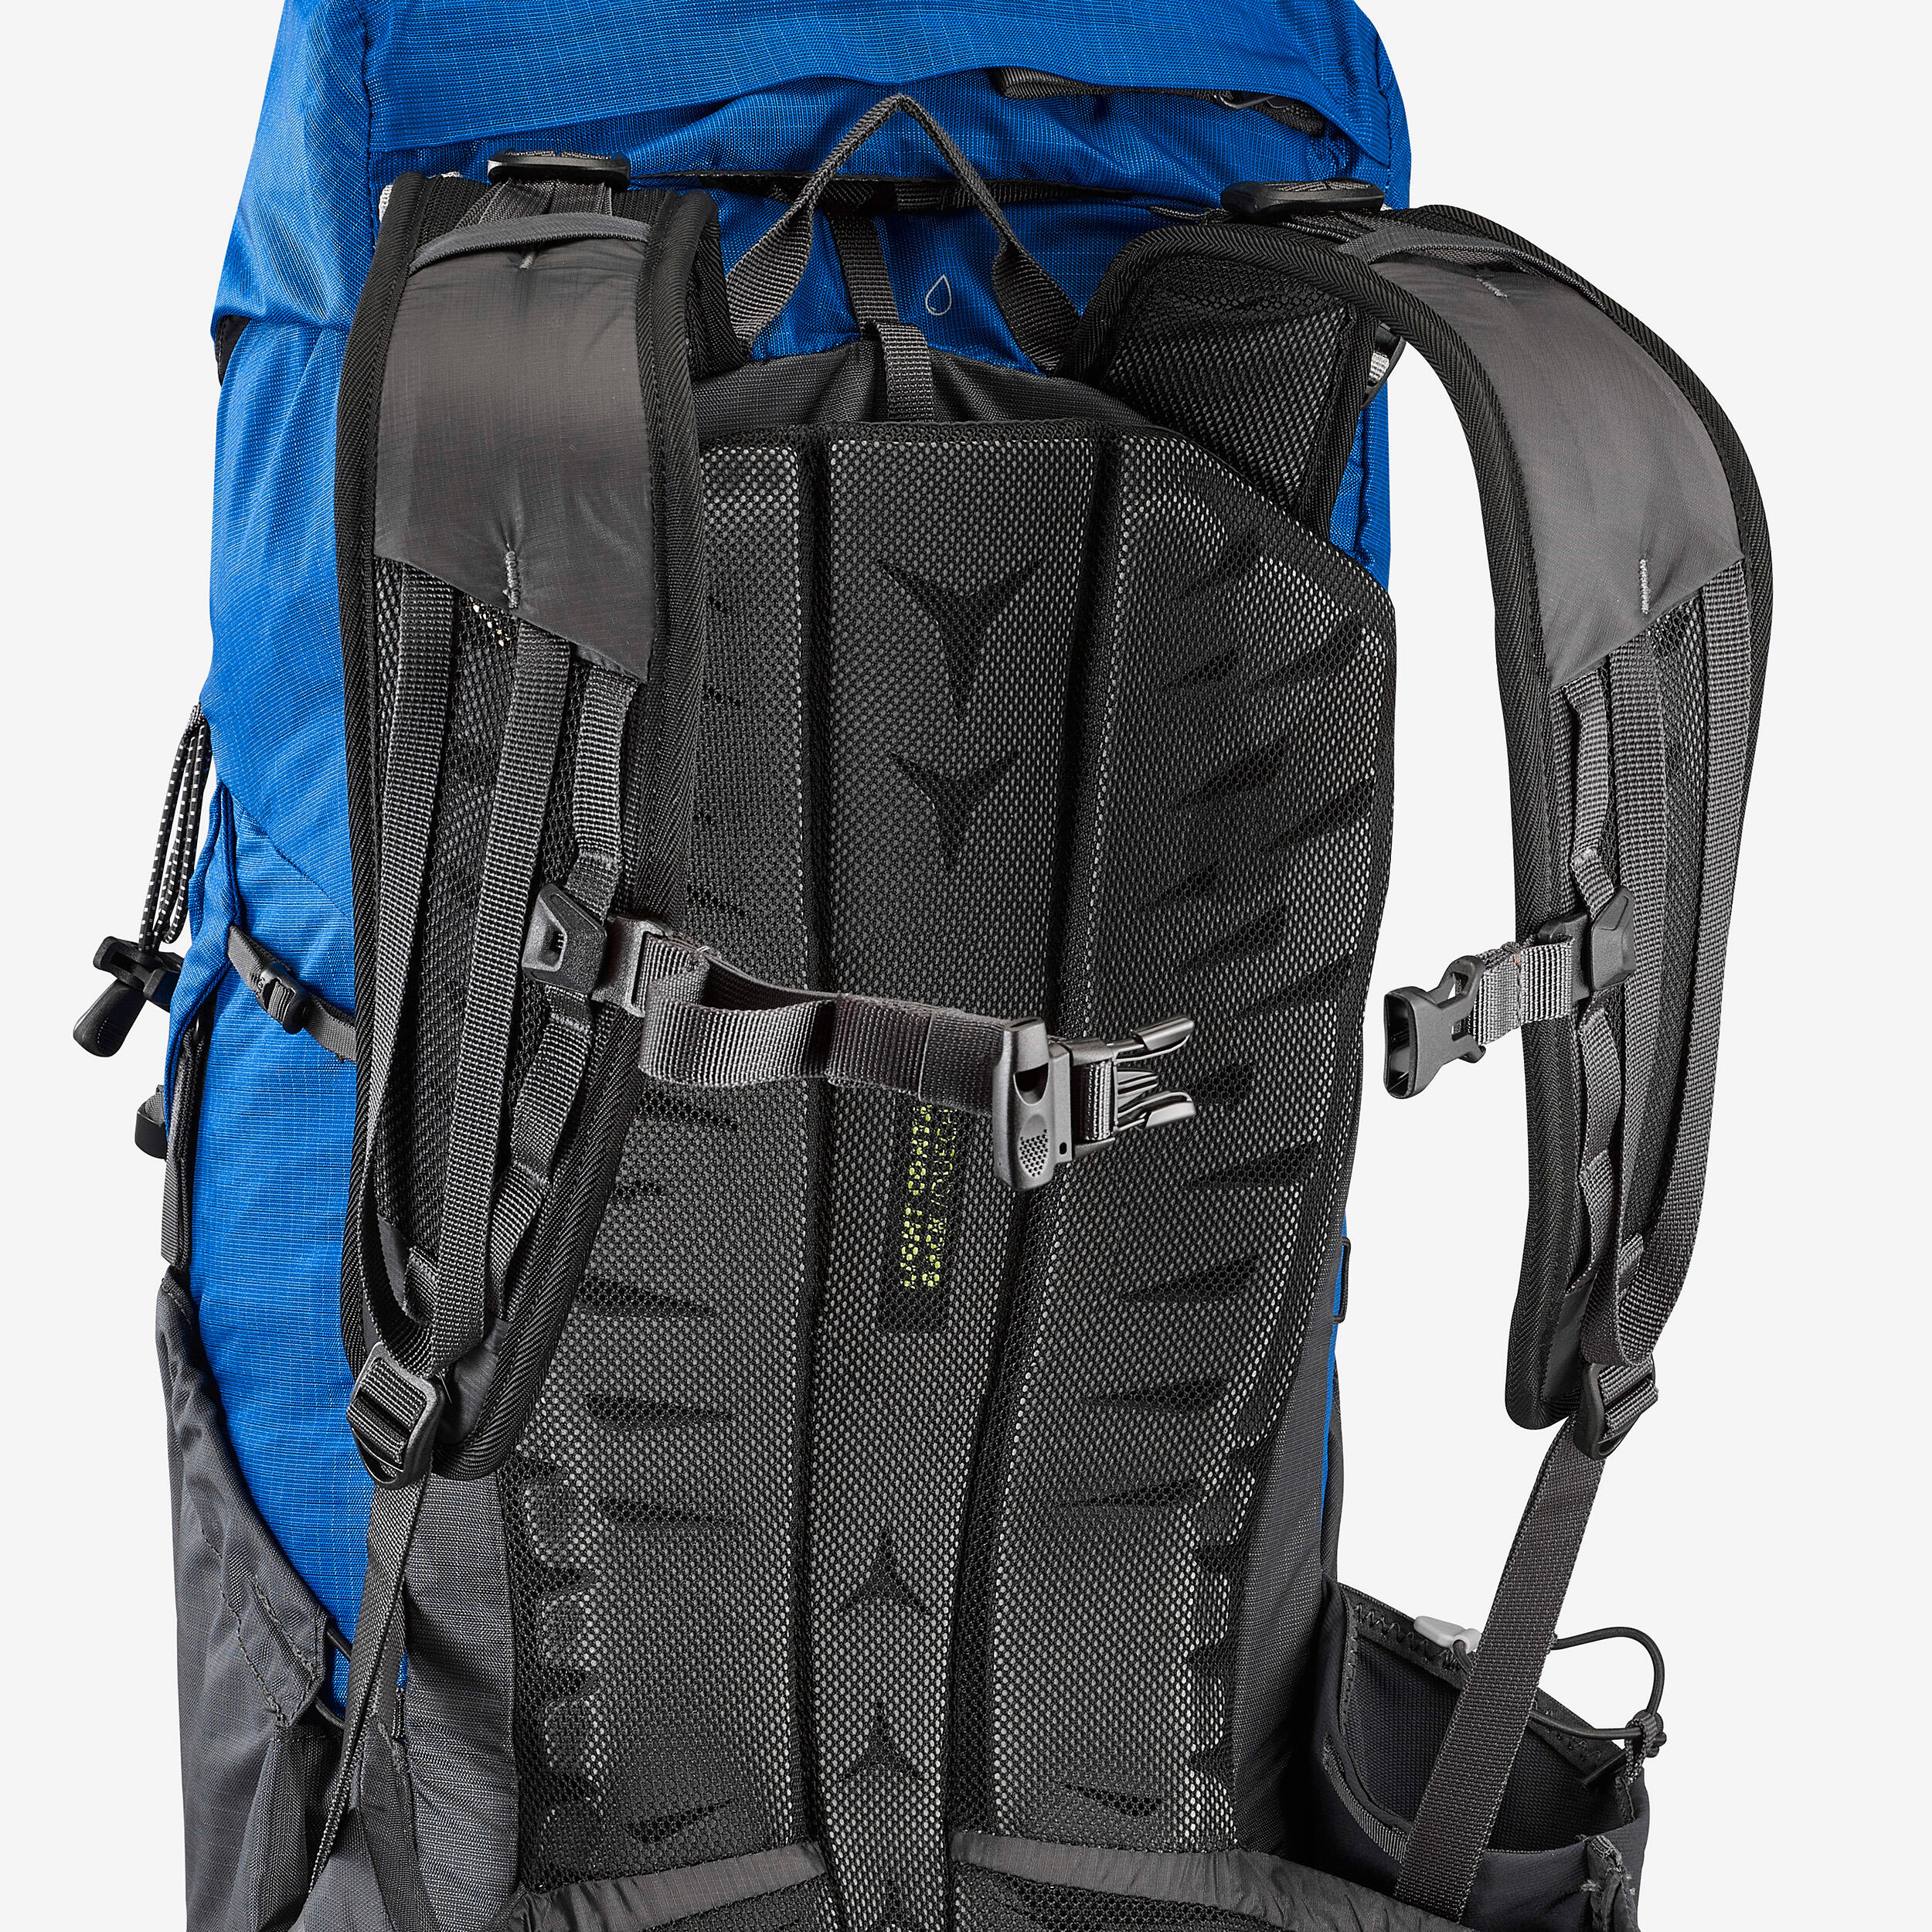 Mountain hiking backpack 25L - MH900 9/18